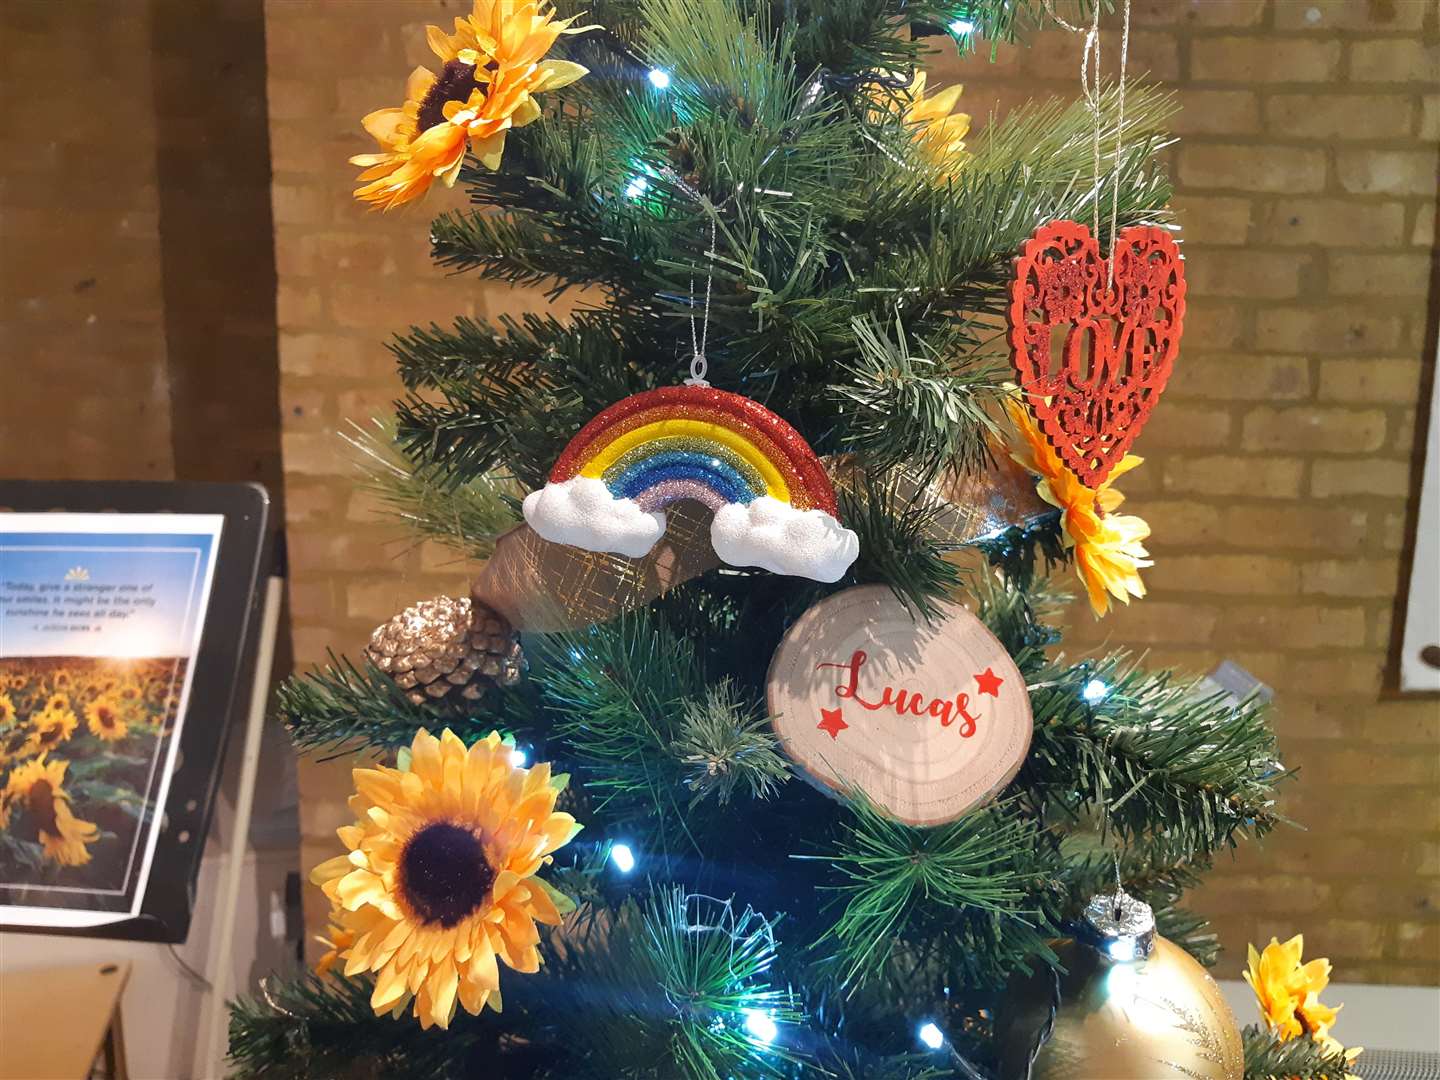 Lucas's memorial Christmas tree was adorned with bright sunflowers